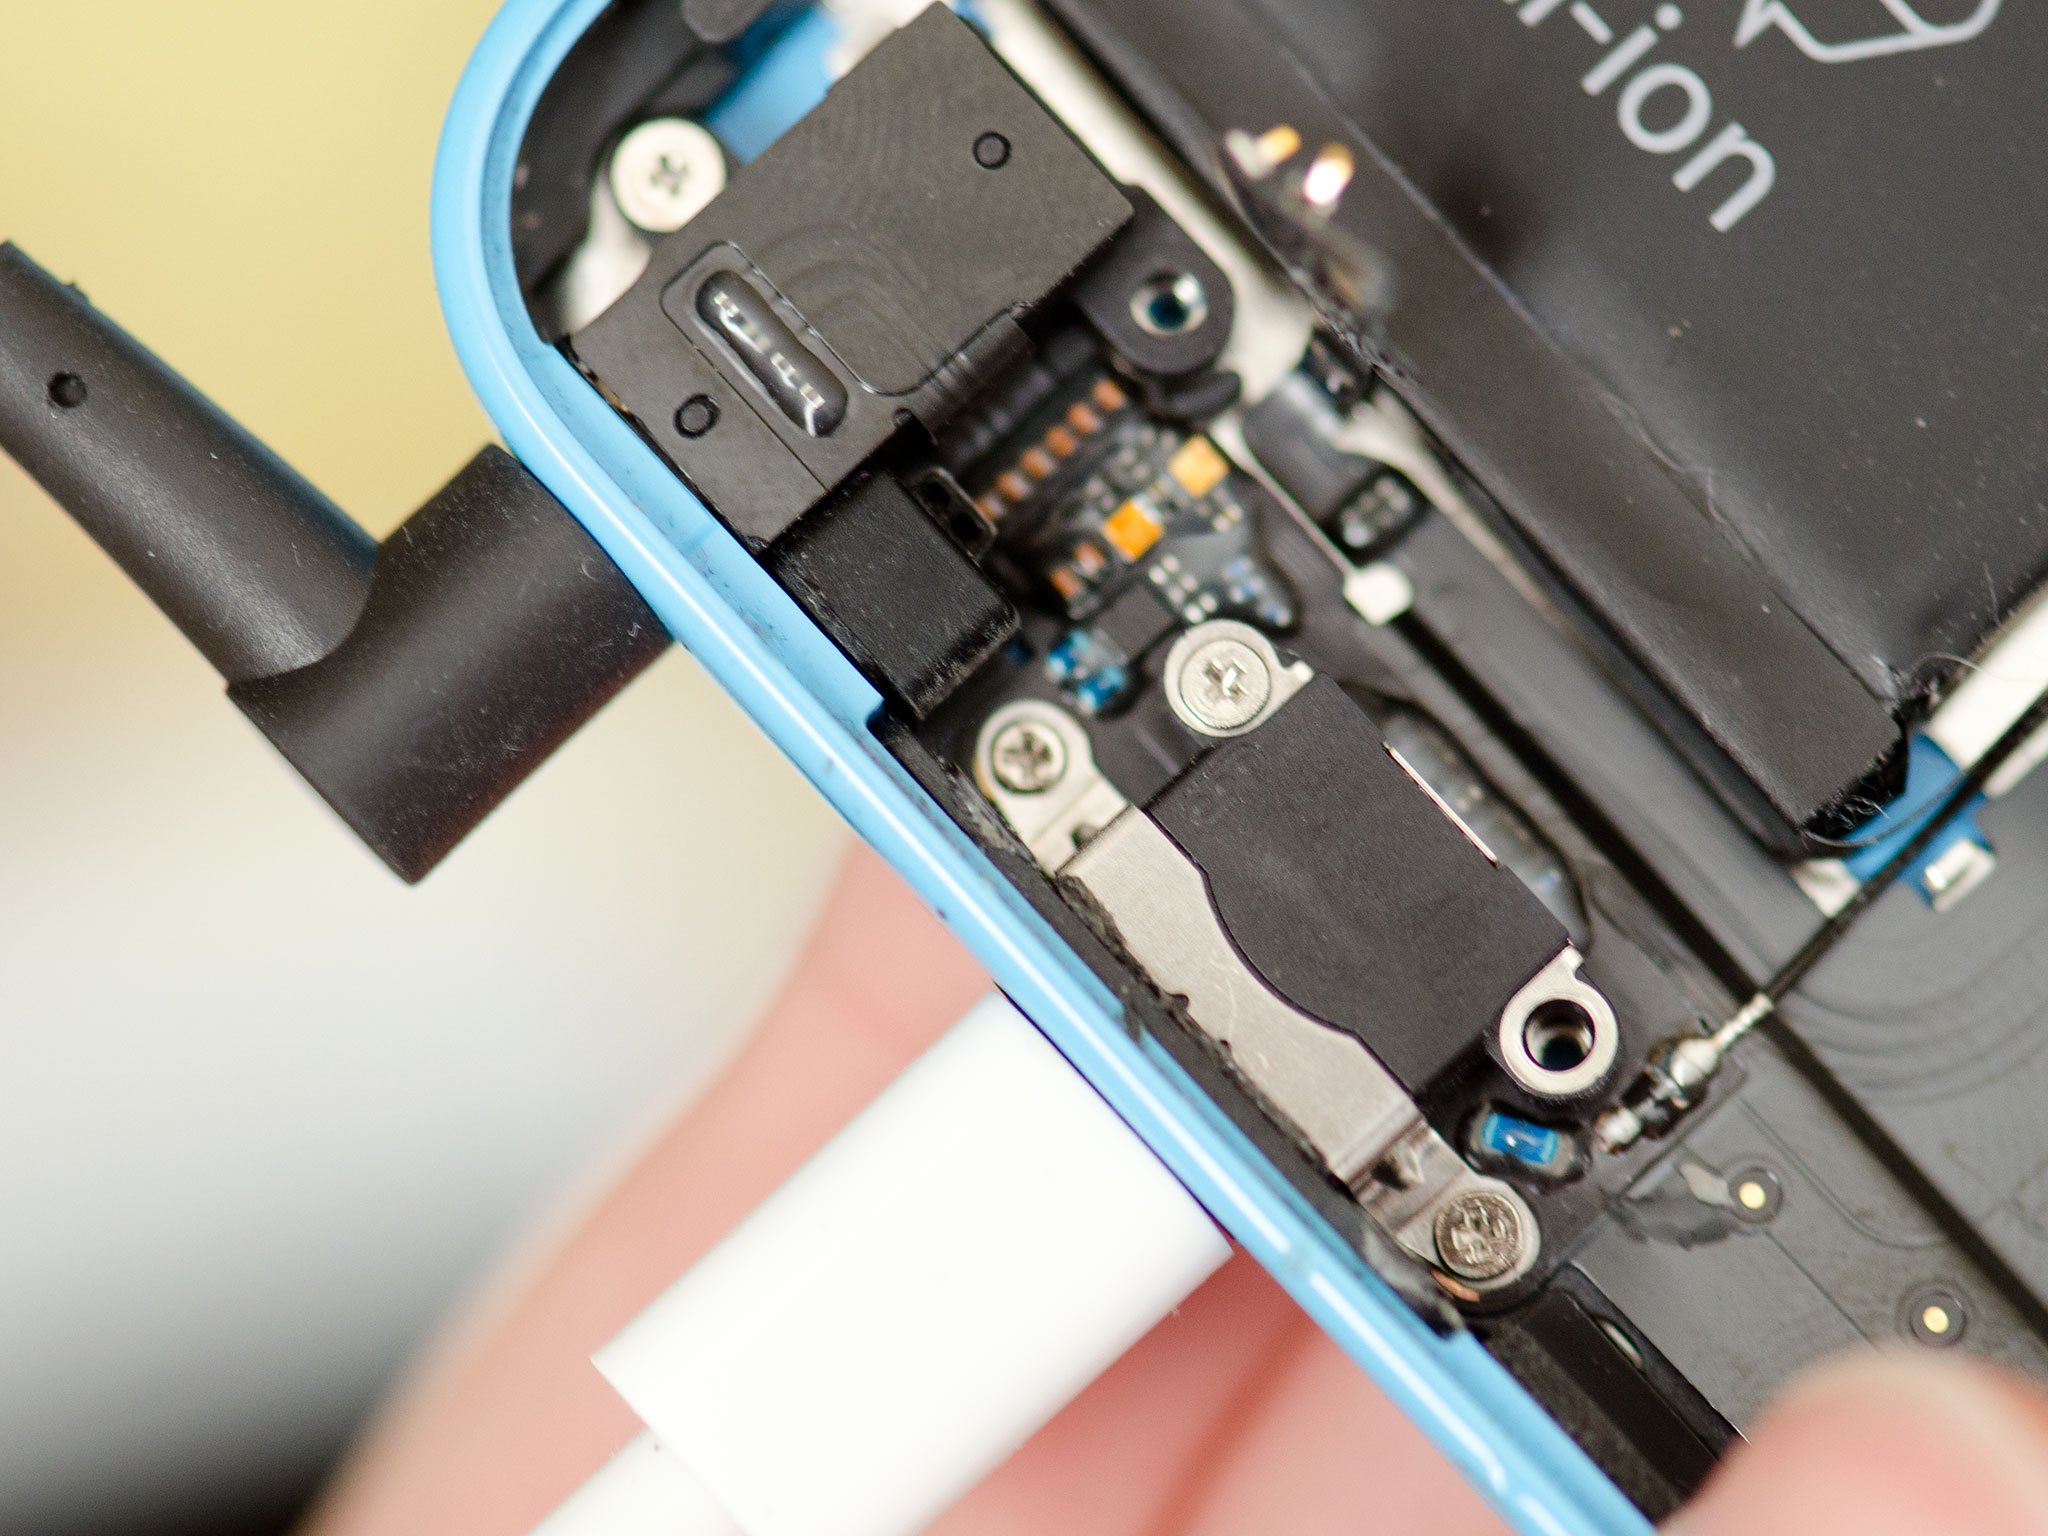 How do you troubleshoot iPhone 5c problems?